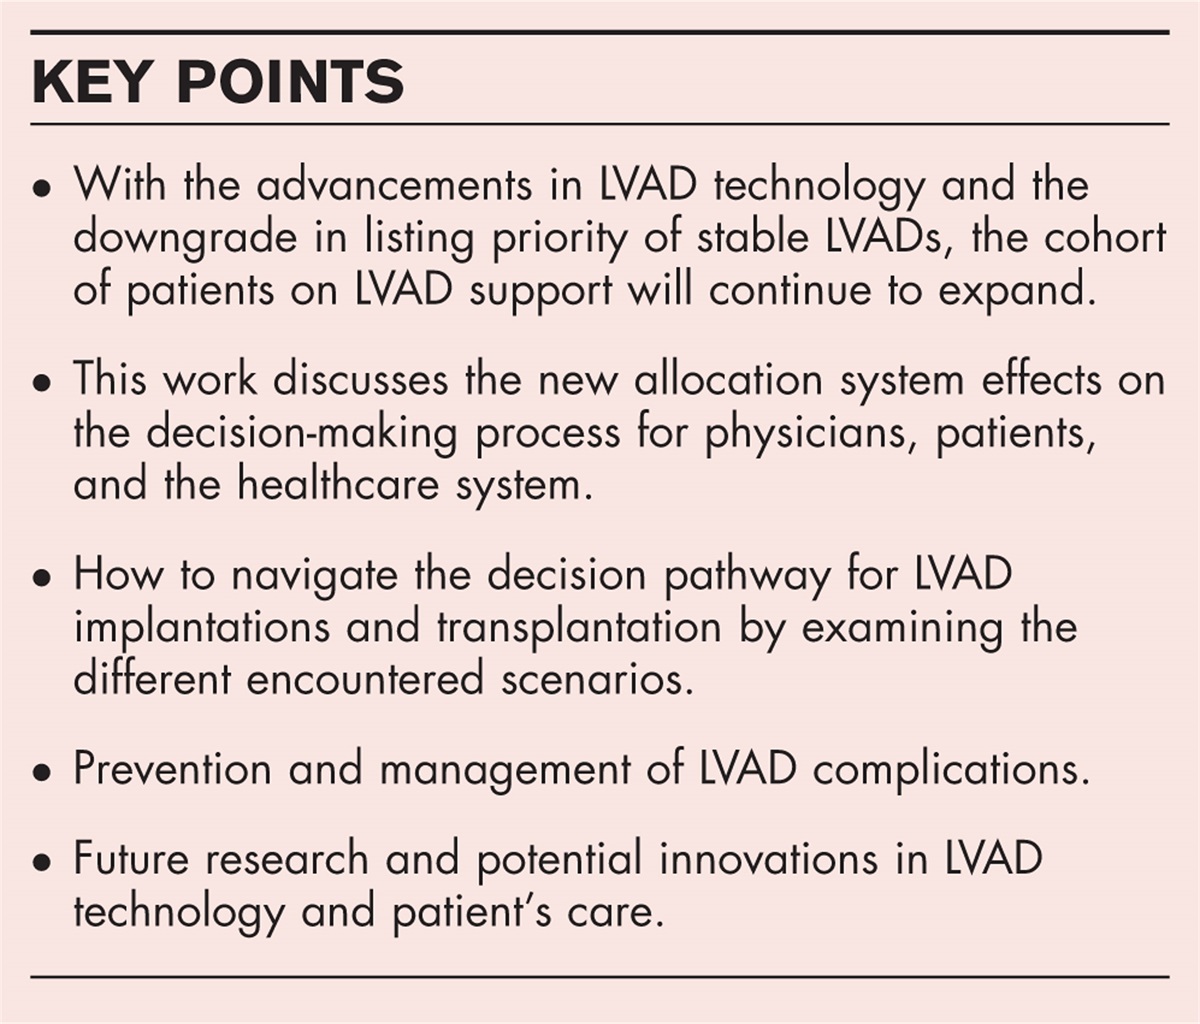 Destination LVAD therapy in the current era of the heart transplant allocation system